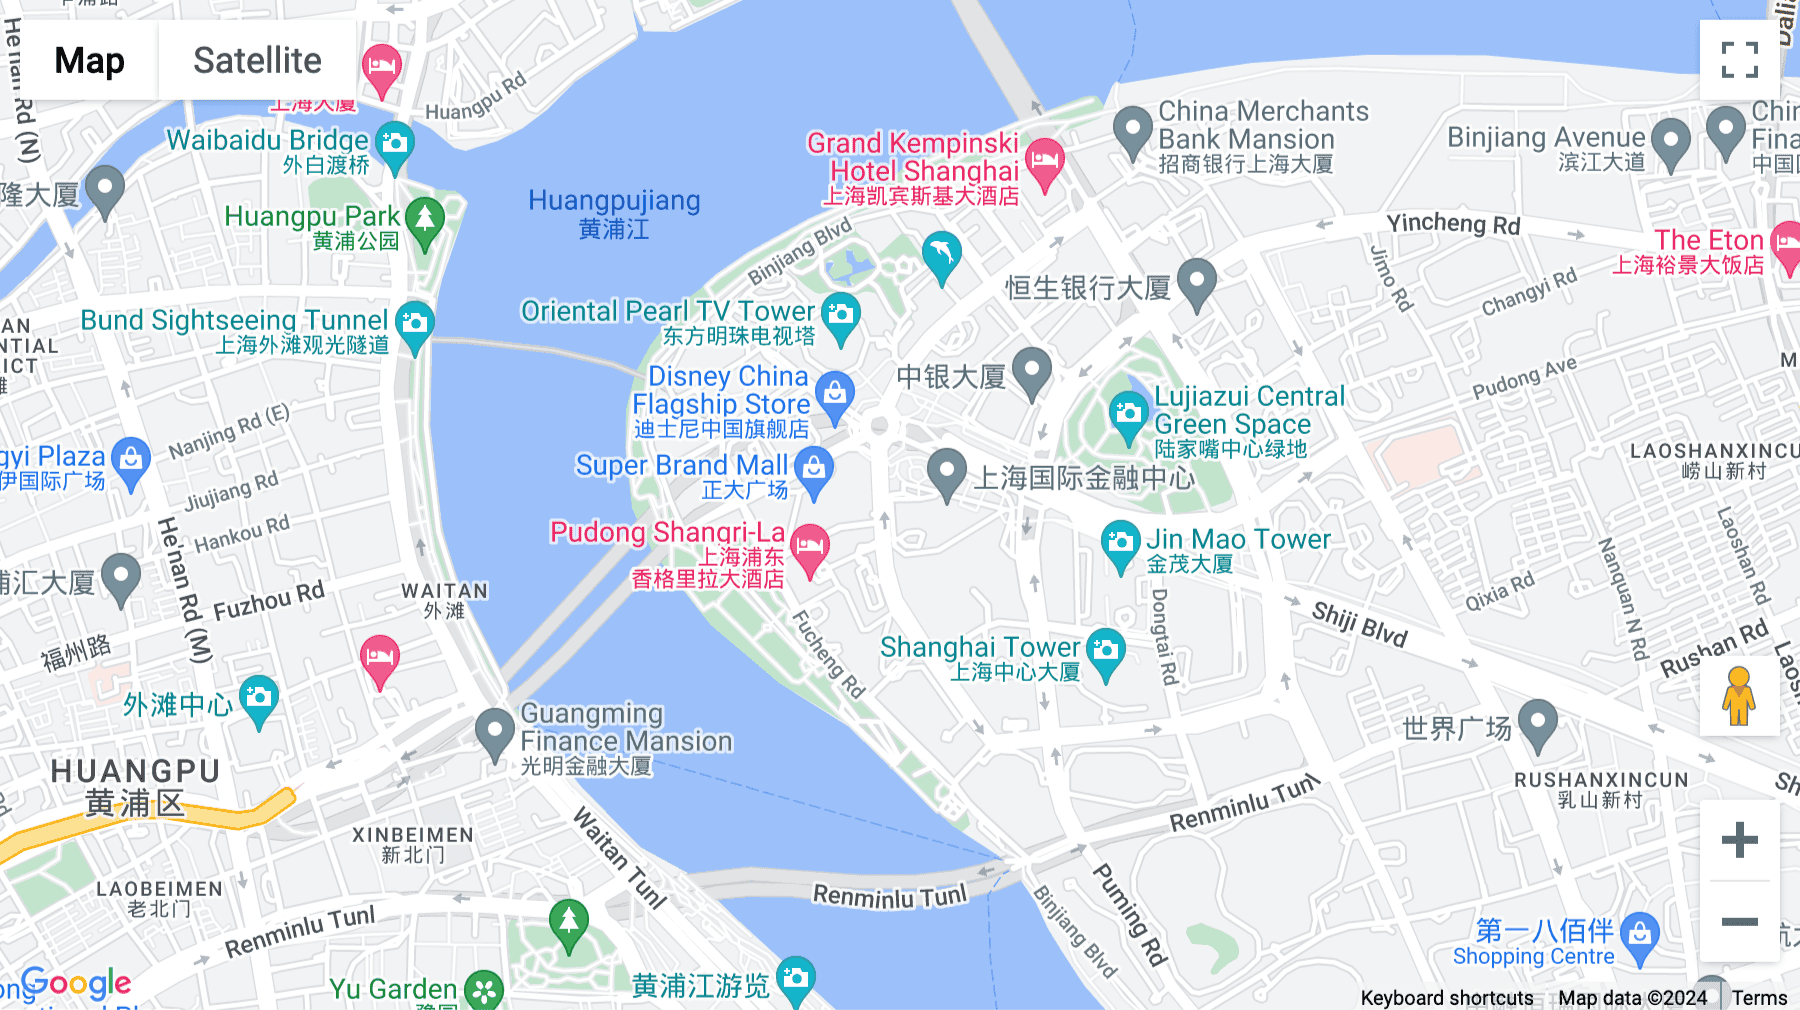 Click for interative map of 15th Floor, HSBC Building, 8 Century Avenue, Pudong, Shanghai